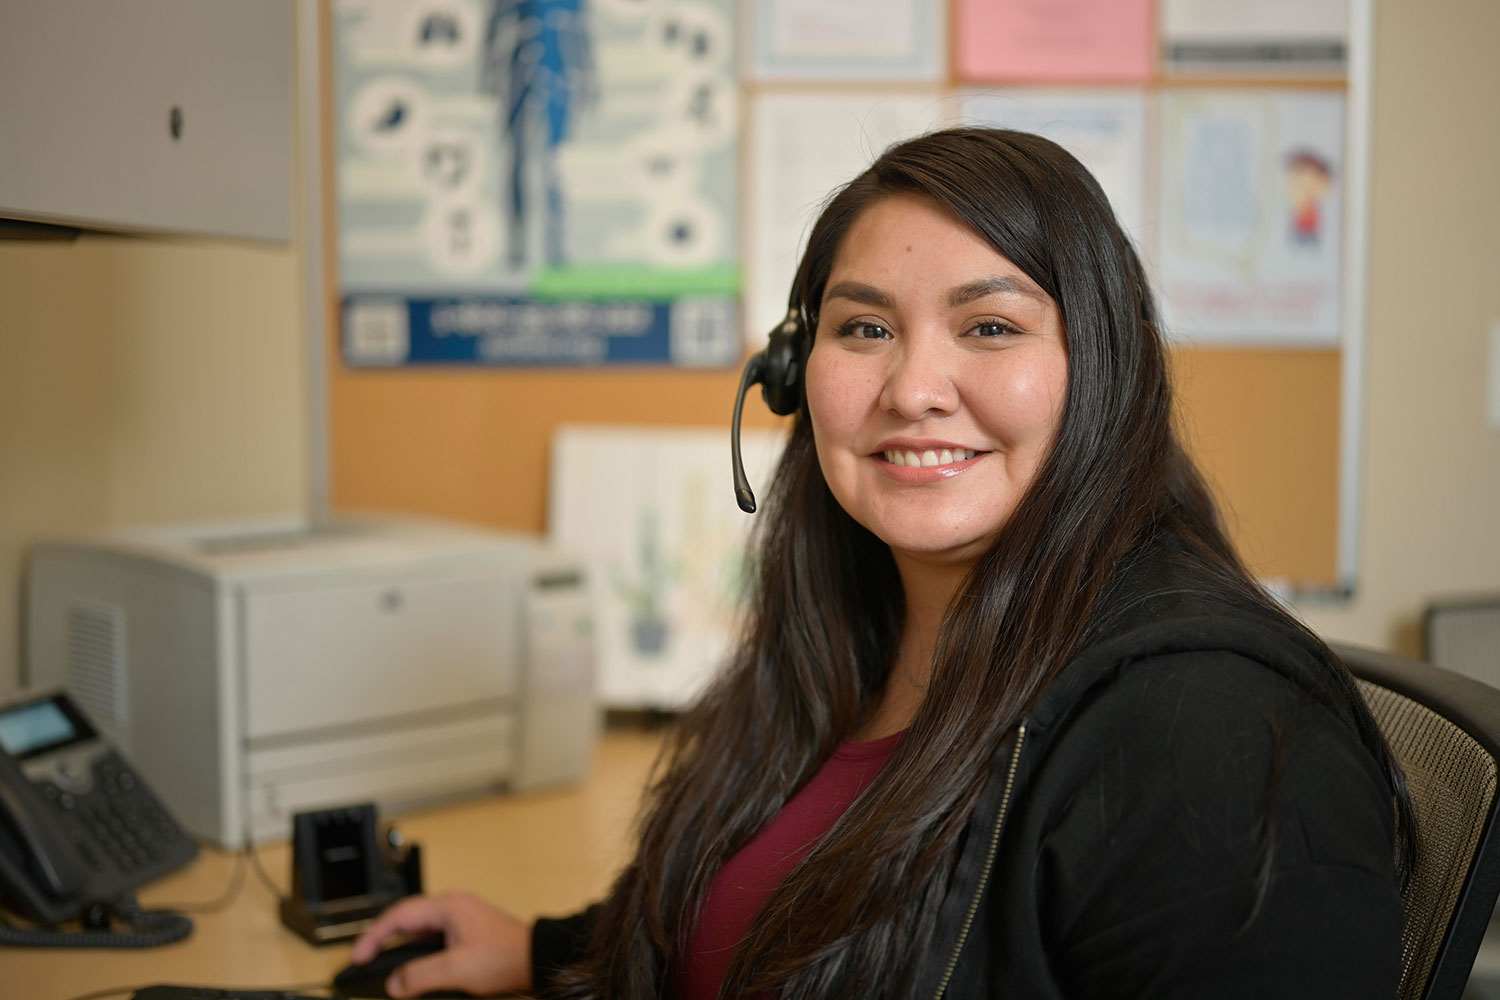 CODAC Treatment Team Member Sitting at a Desk With a Headset Smiling.